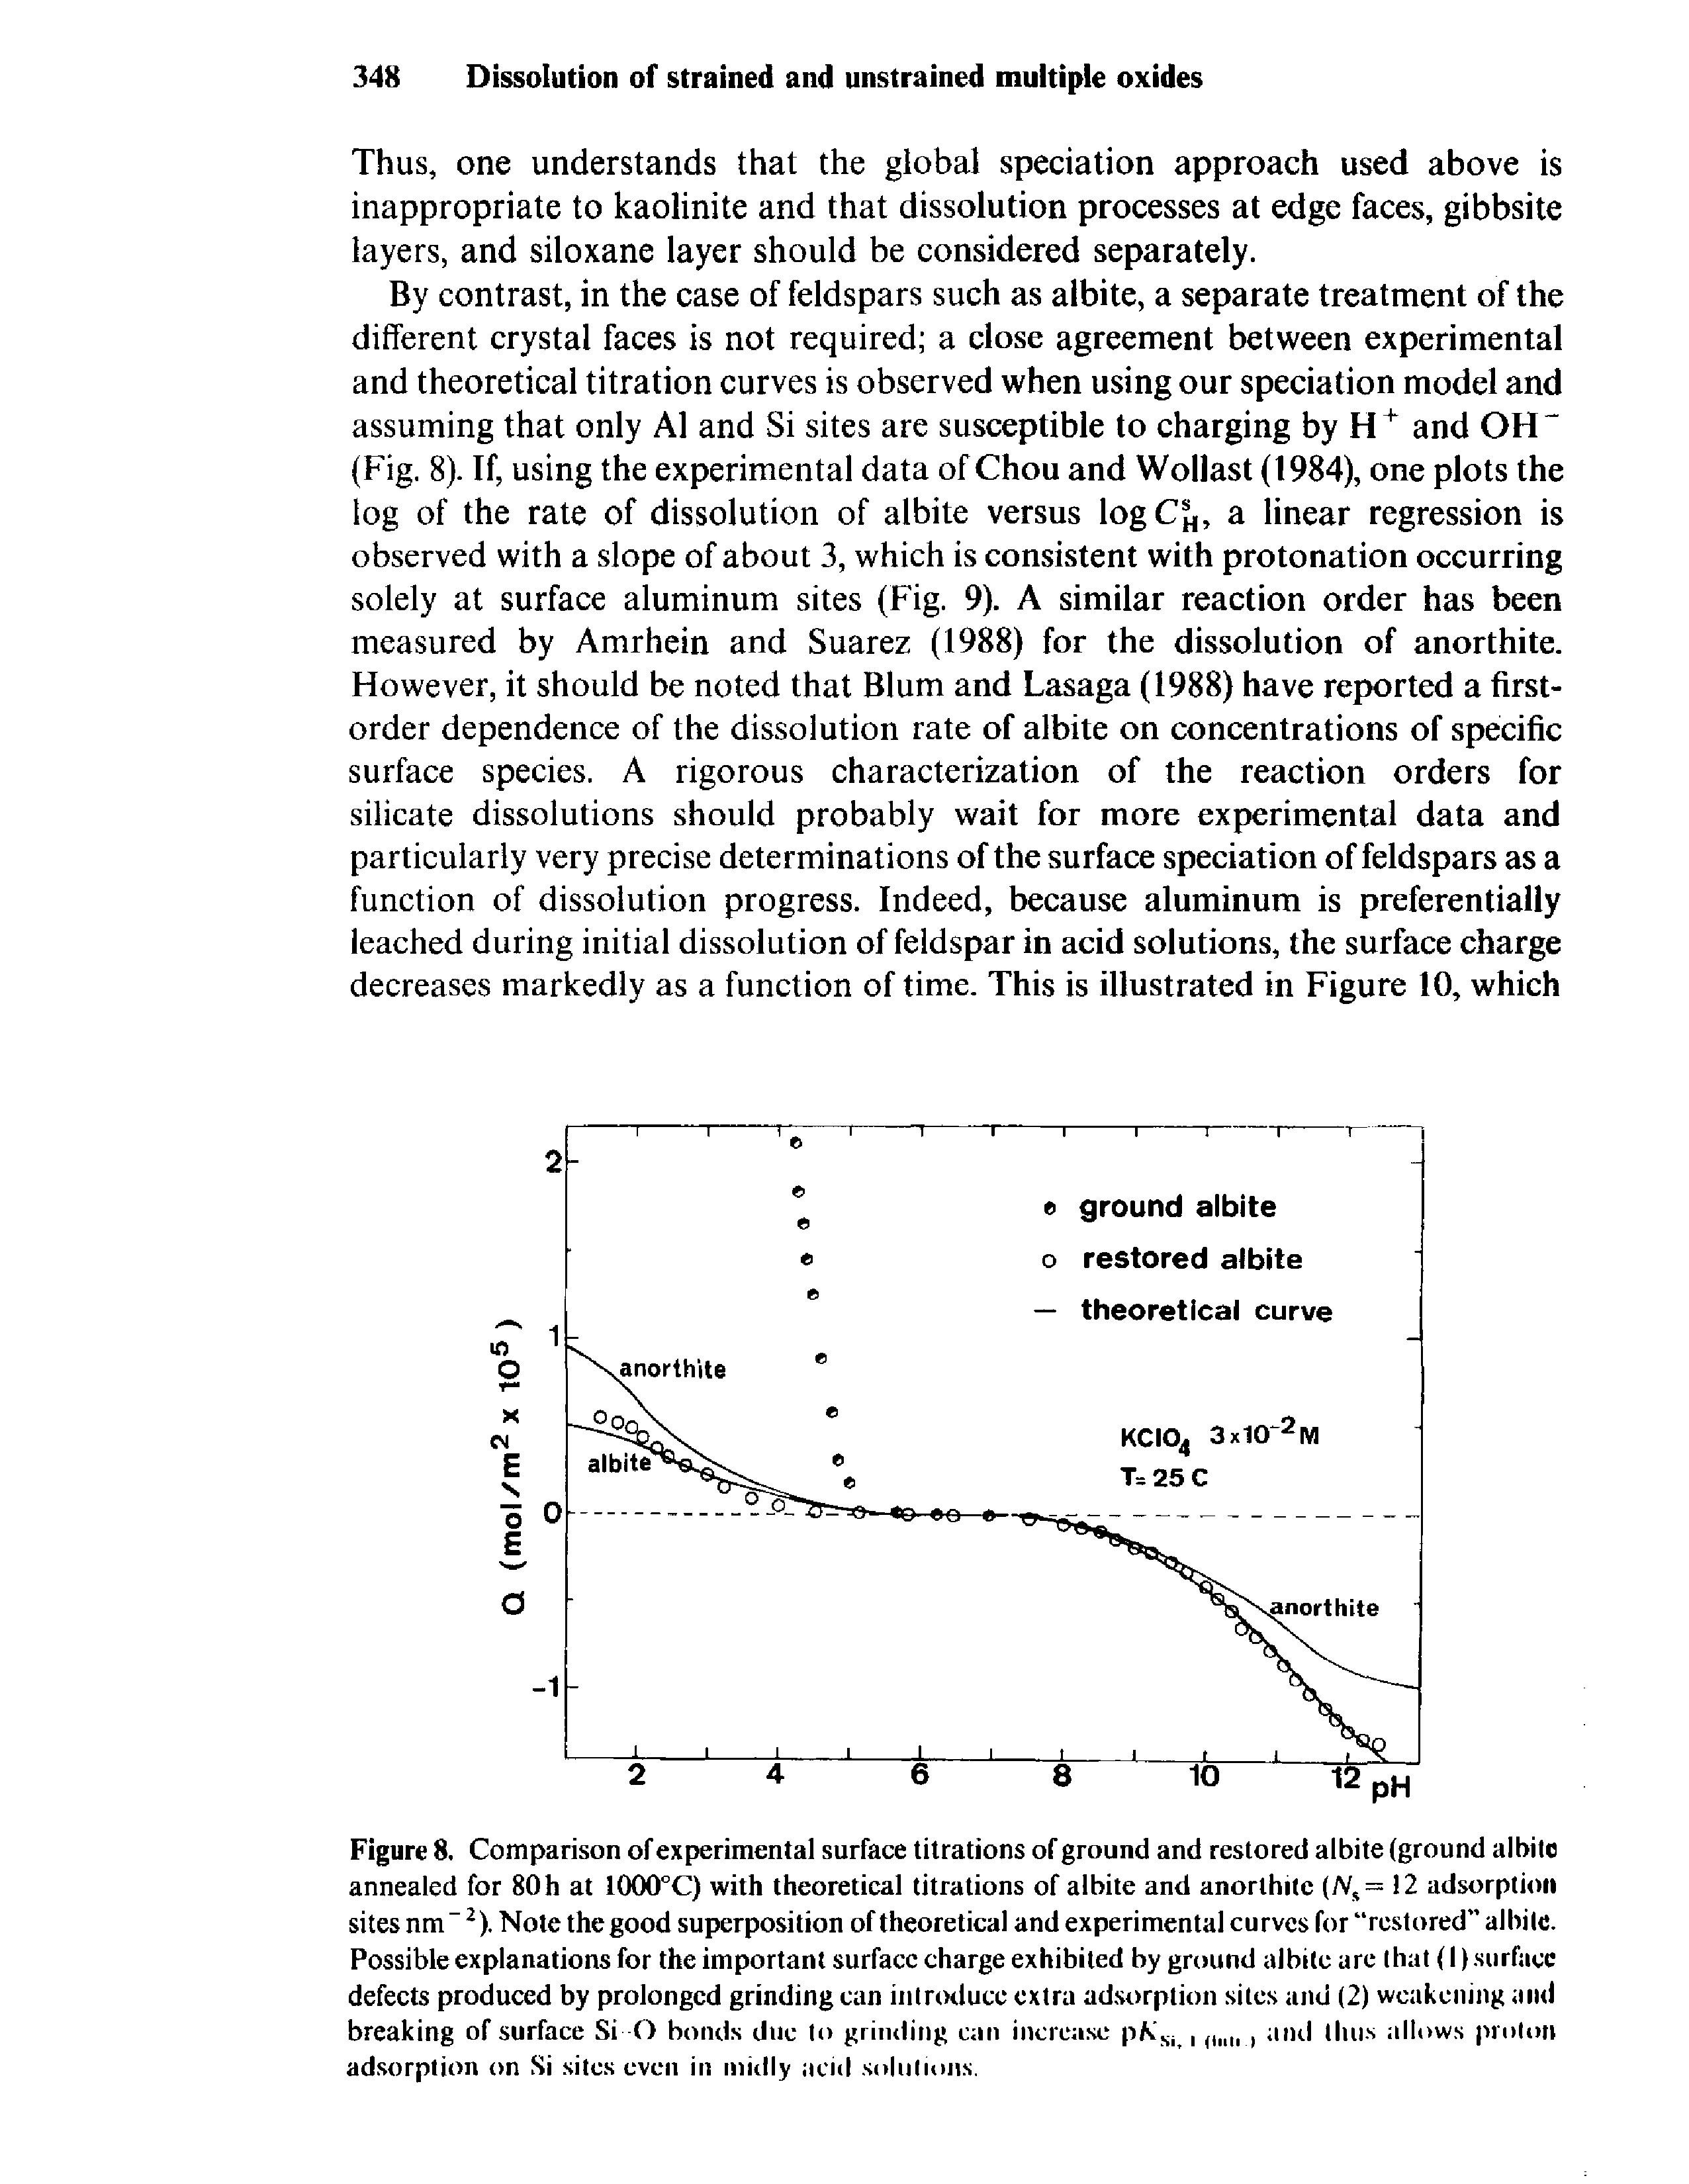 Figure 8. Comparison of experimental surface titrations of ground and restored albite (ground albite annealed for 80 h at 1000°C) with theoretical titrations of albite and anorthite N% = 12 adsorption sites nm 2). Note the good superposition of theoretical and experimental curves for restored albite. Possible explanations for the important surface charge exhibited by ground albite are that (I) surface defects produced by prolonged grinding can introduce extra adsorption sites and (2) weakening and breaking of surface Si O bonds due to grinding can increase pKSi, ()11 1, and thus allows proton adsorption on Si sites even in midly acid solutions.